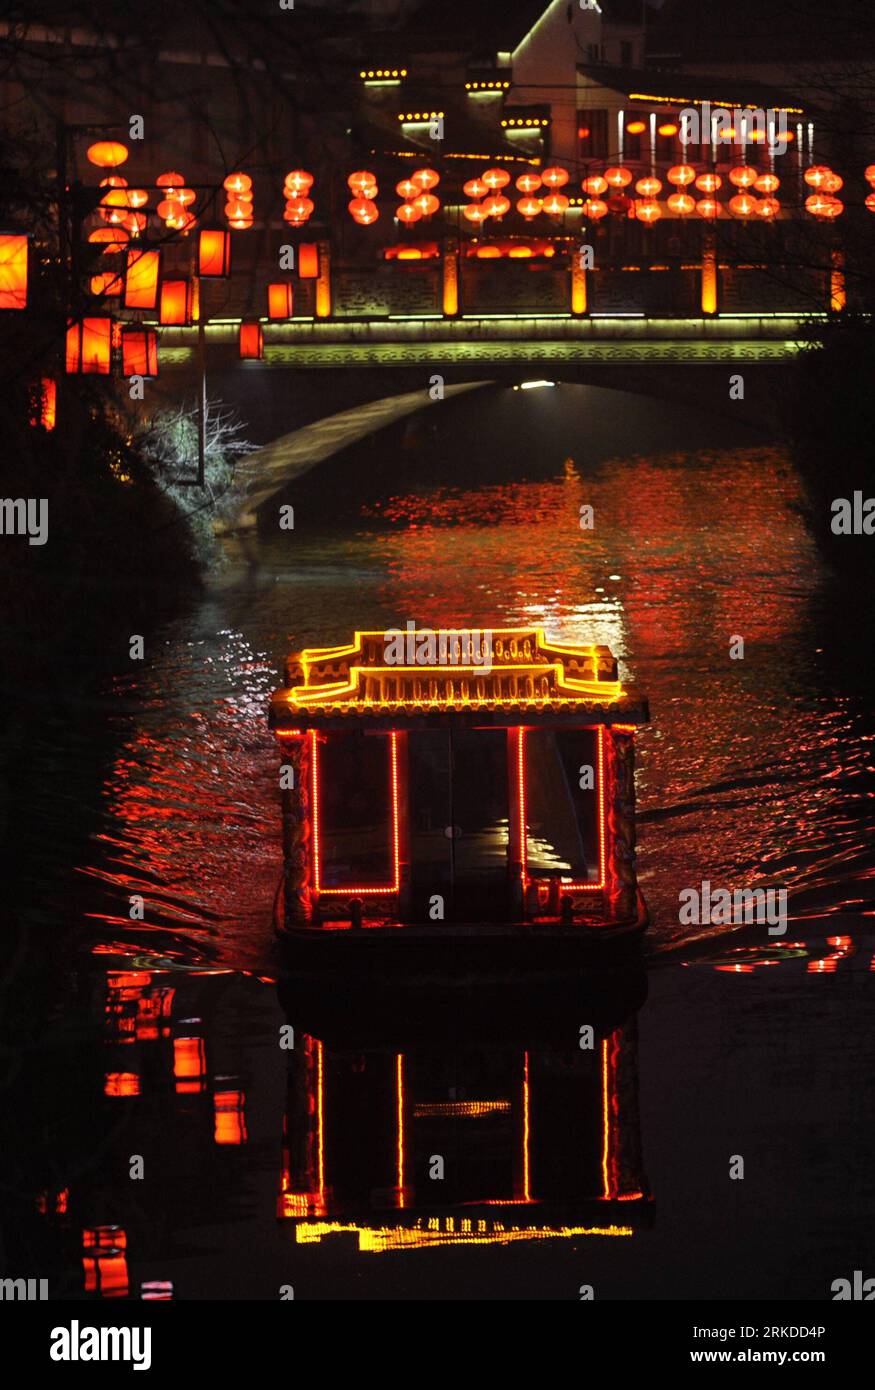 Bildnummer: 54919492  Datum: 16.02.2011  Copyright: imago/Xinhua (110217) -- NANJING, Feb. 17, 2011 (Xinhua) -- A lantern boat sails on the glinting Qinhuai River during the annual lantern carnival in Nanjing, capital of east China s Jiangsu Province, Feb. 16, 2011. The Lantern Festival, which officially ends the Lunar New Year celebrations, arrives on Thursday. (Xinhua/Yang Lei) (ljh) CHINA-LANTERN FESTIVAL-CELEBRATIONS (CN) PUBLICATIONxNOTxINxCHN Gesellschaft Kultur Laternen Laternenfest kbdig xsk 2011 hoch  o0 Restlicht, Nacht, Totale, Boot, Laternenboot    Bildnummer 54919492 Date 16 02 20 Stock Photo